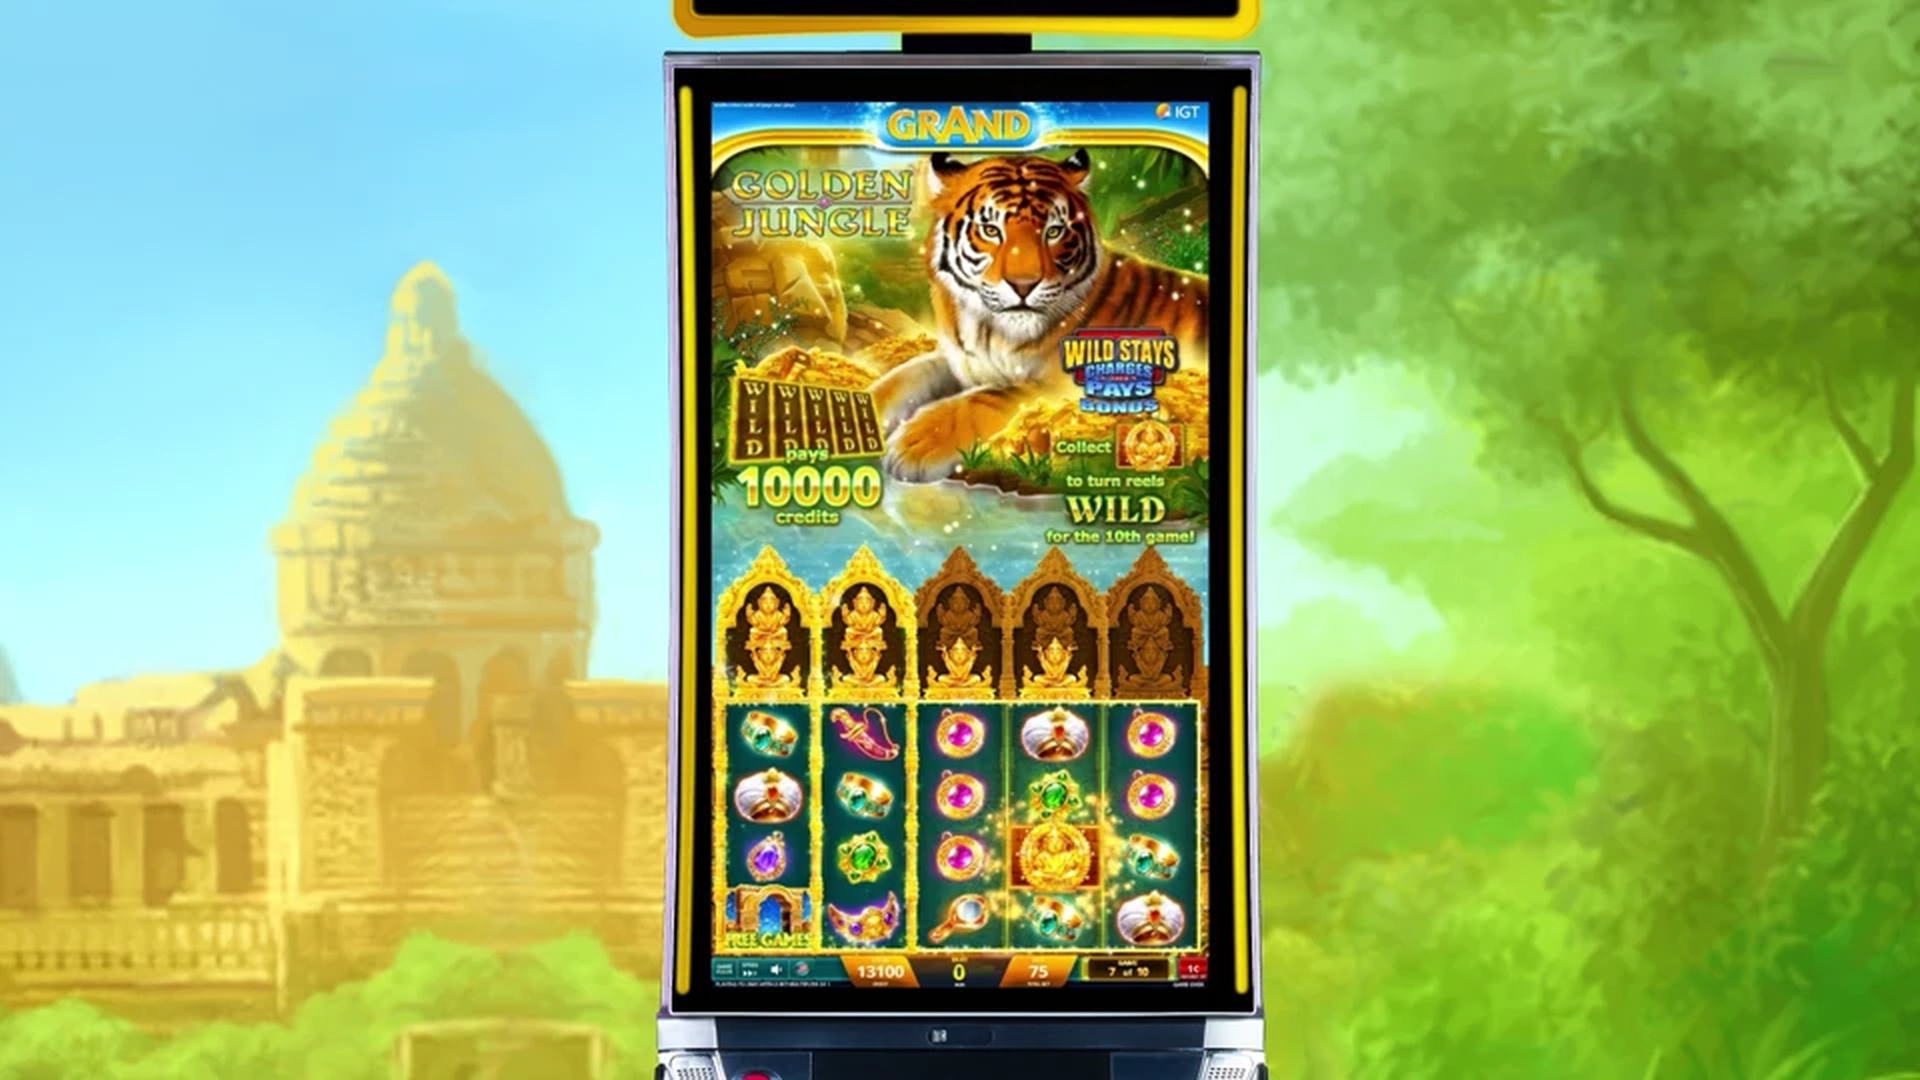 The Golden Jungle Online Slot Demo Game by IGT